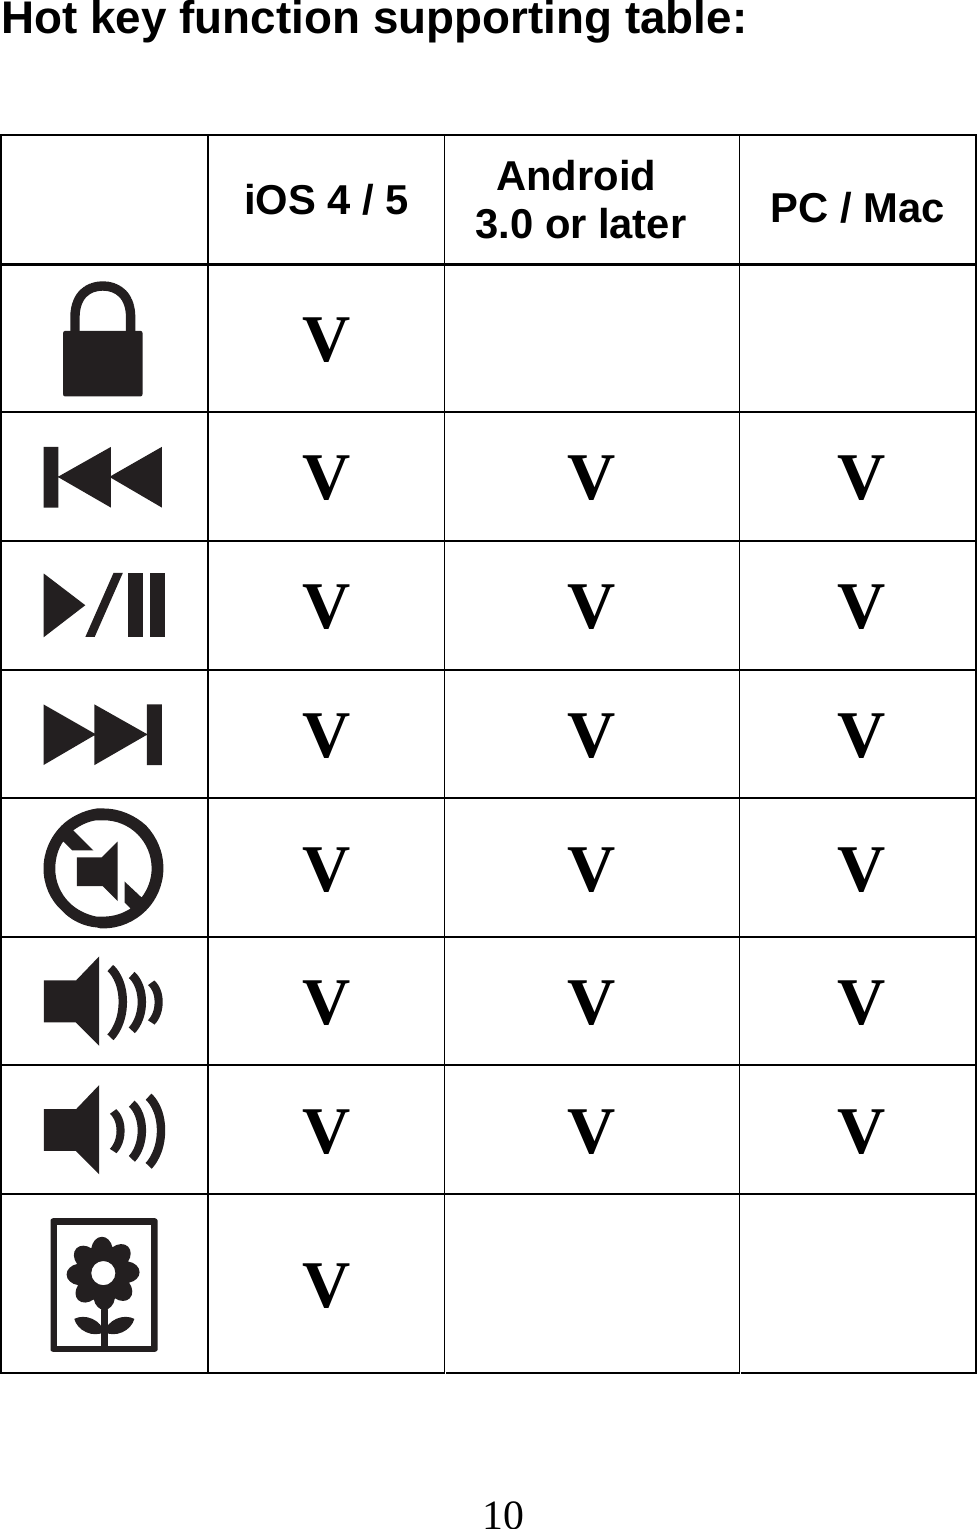  10Hot key function supporting table:   iOS 4 / 5 Android 3.0 or later  PC / Mac V     V V V  V V V  V V     V  V V V  V V V  V V V  V   